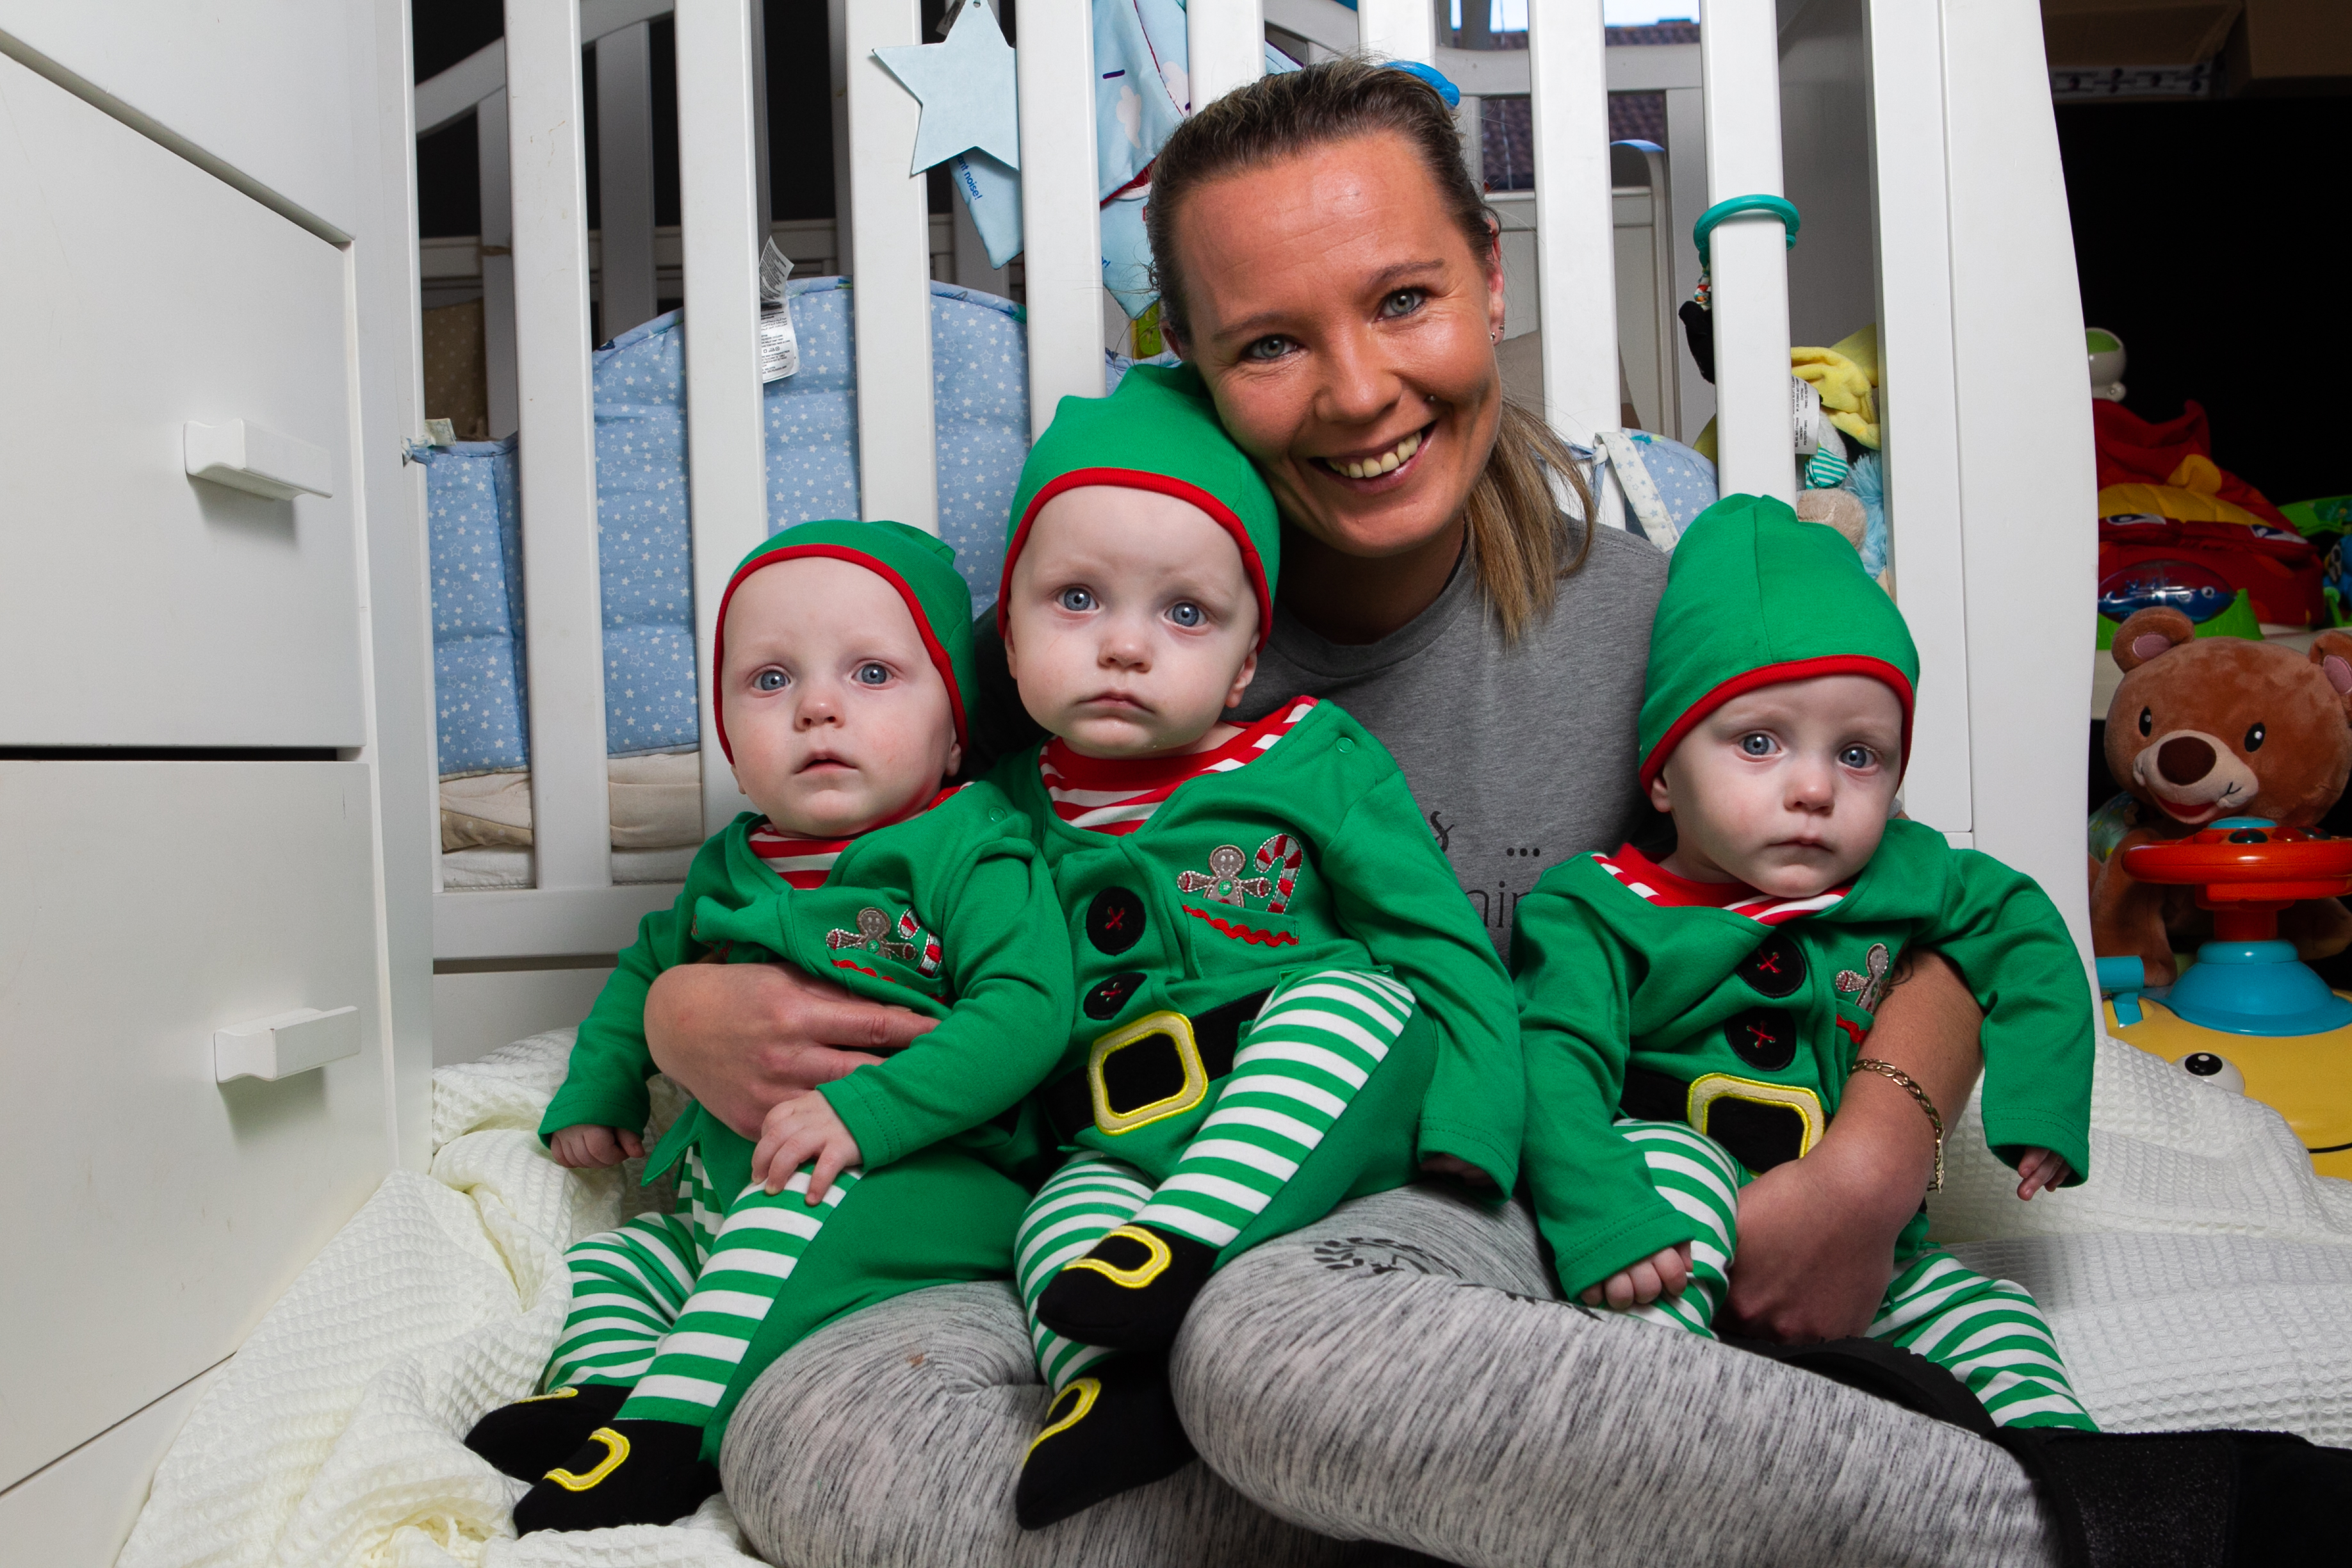 Mother Mary McCandlish and her triplet babies, wearing Christmas elf outfits. (Andrew Cawley).